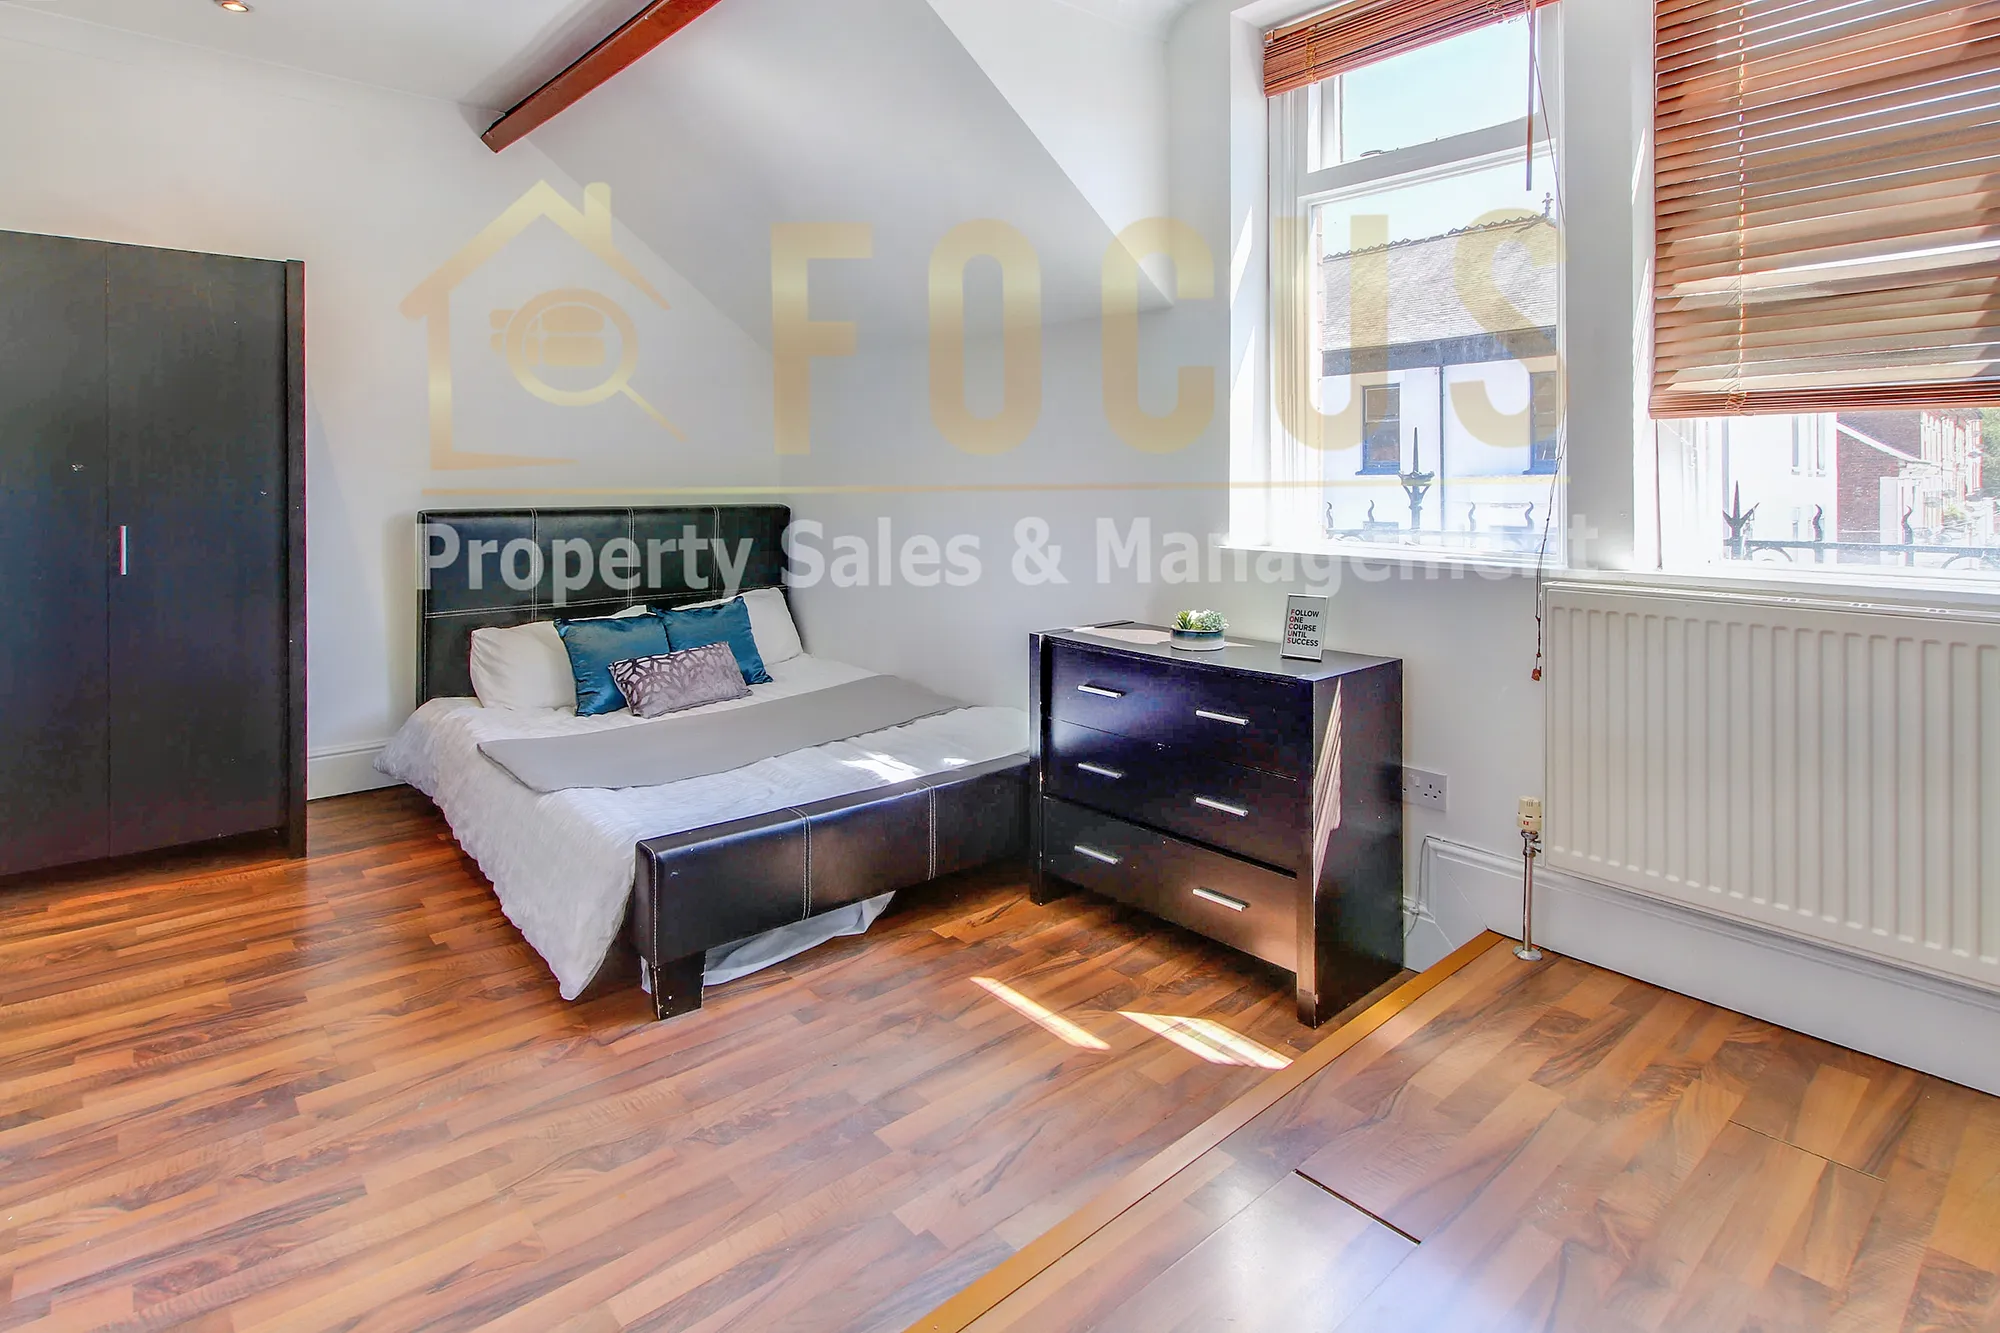 1 bed studio flat to rent in Saxby Street, Leicester - Property Image 1